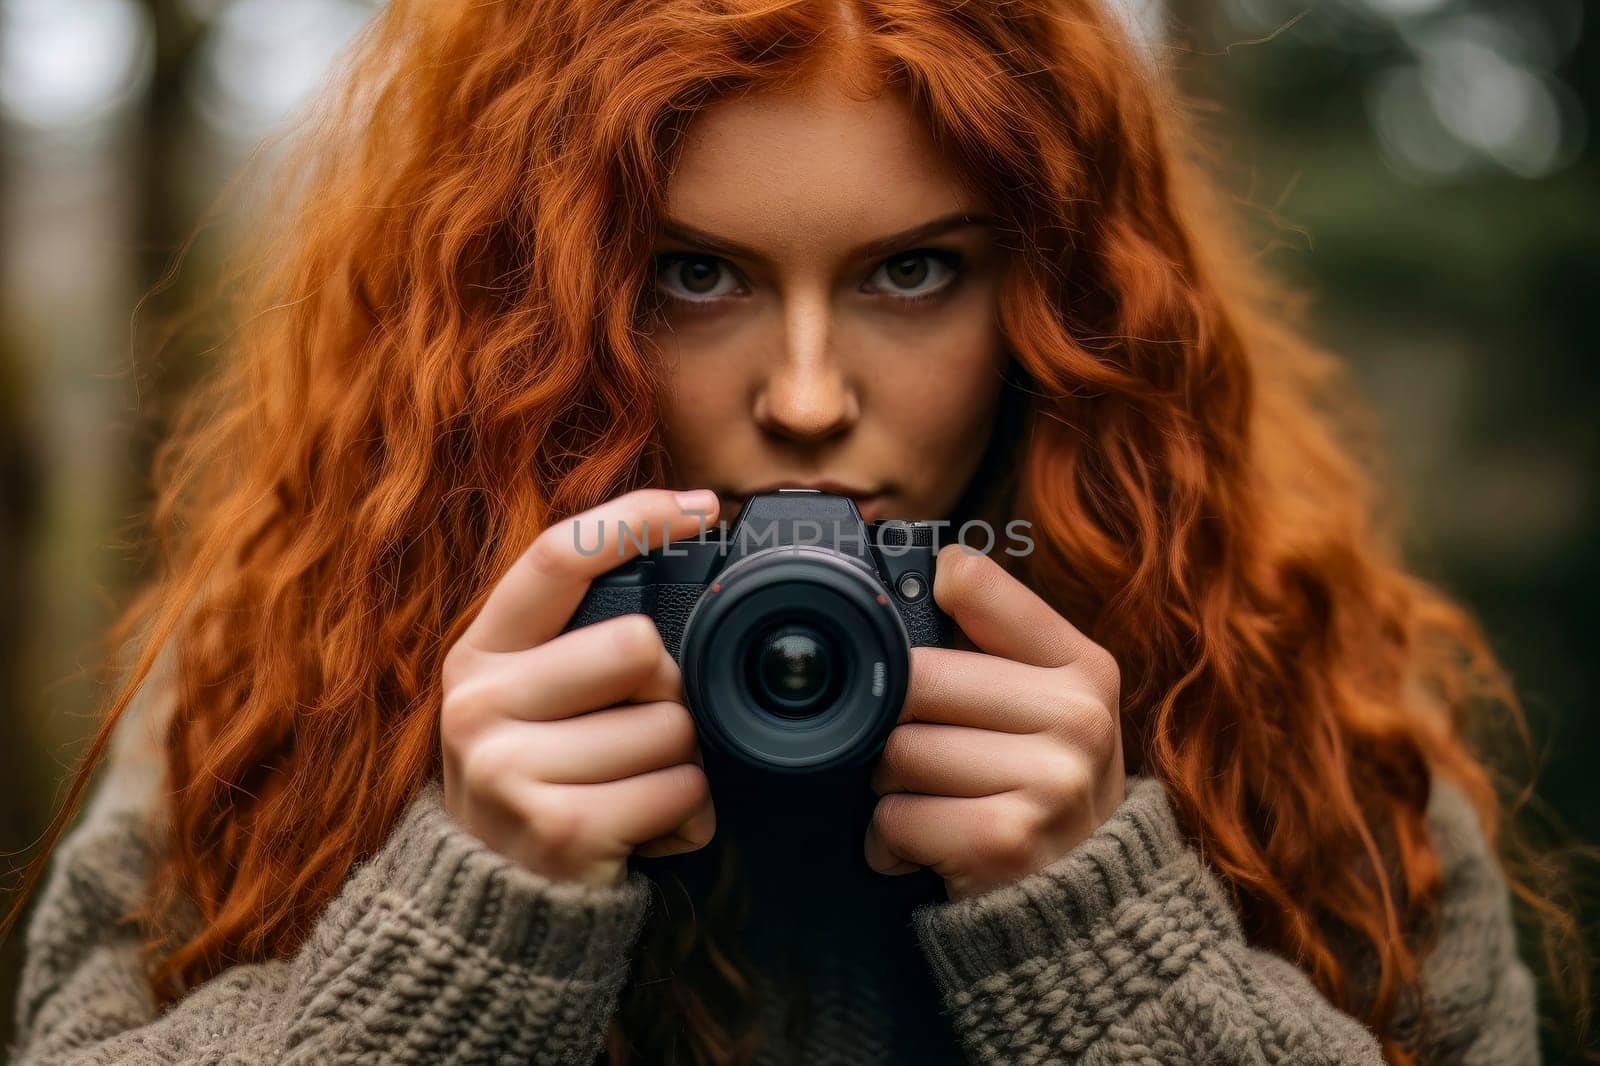 Enthusiastic young woman with a camera in hand, ready to capture the world's beauty.